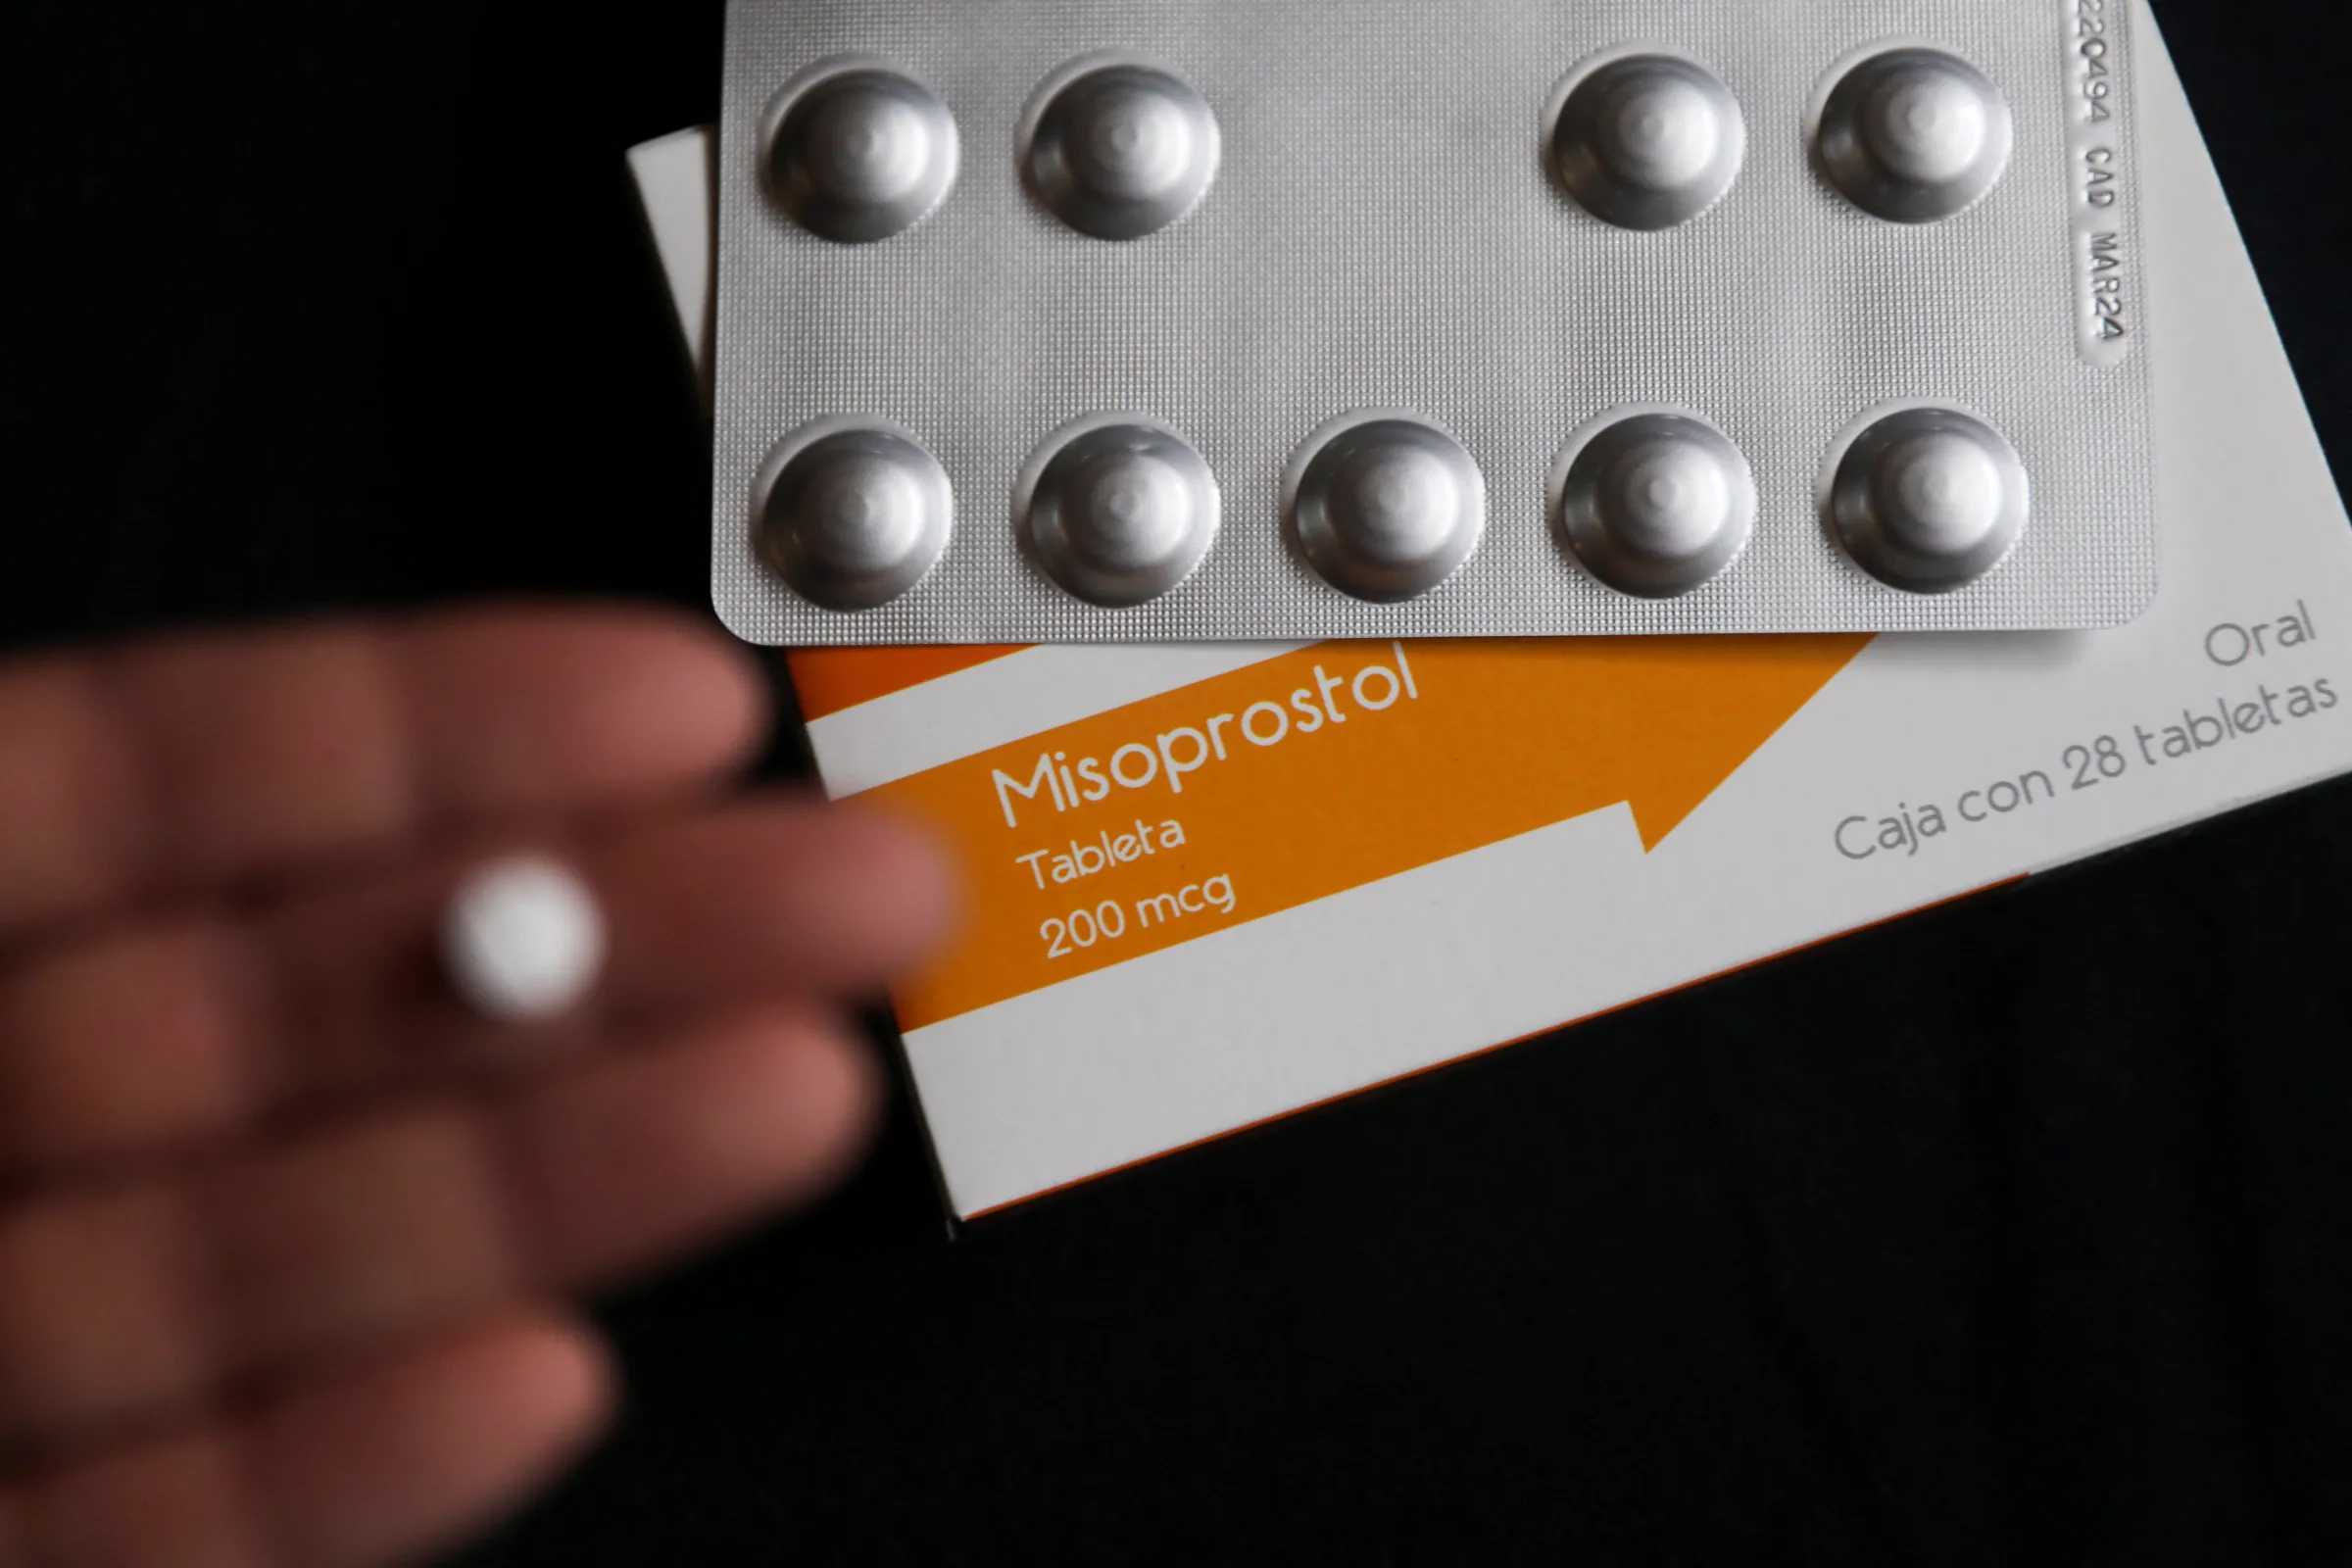 A box of Misoprostol, used to terminate early pregnancies, is pictured